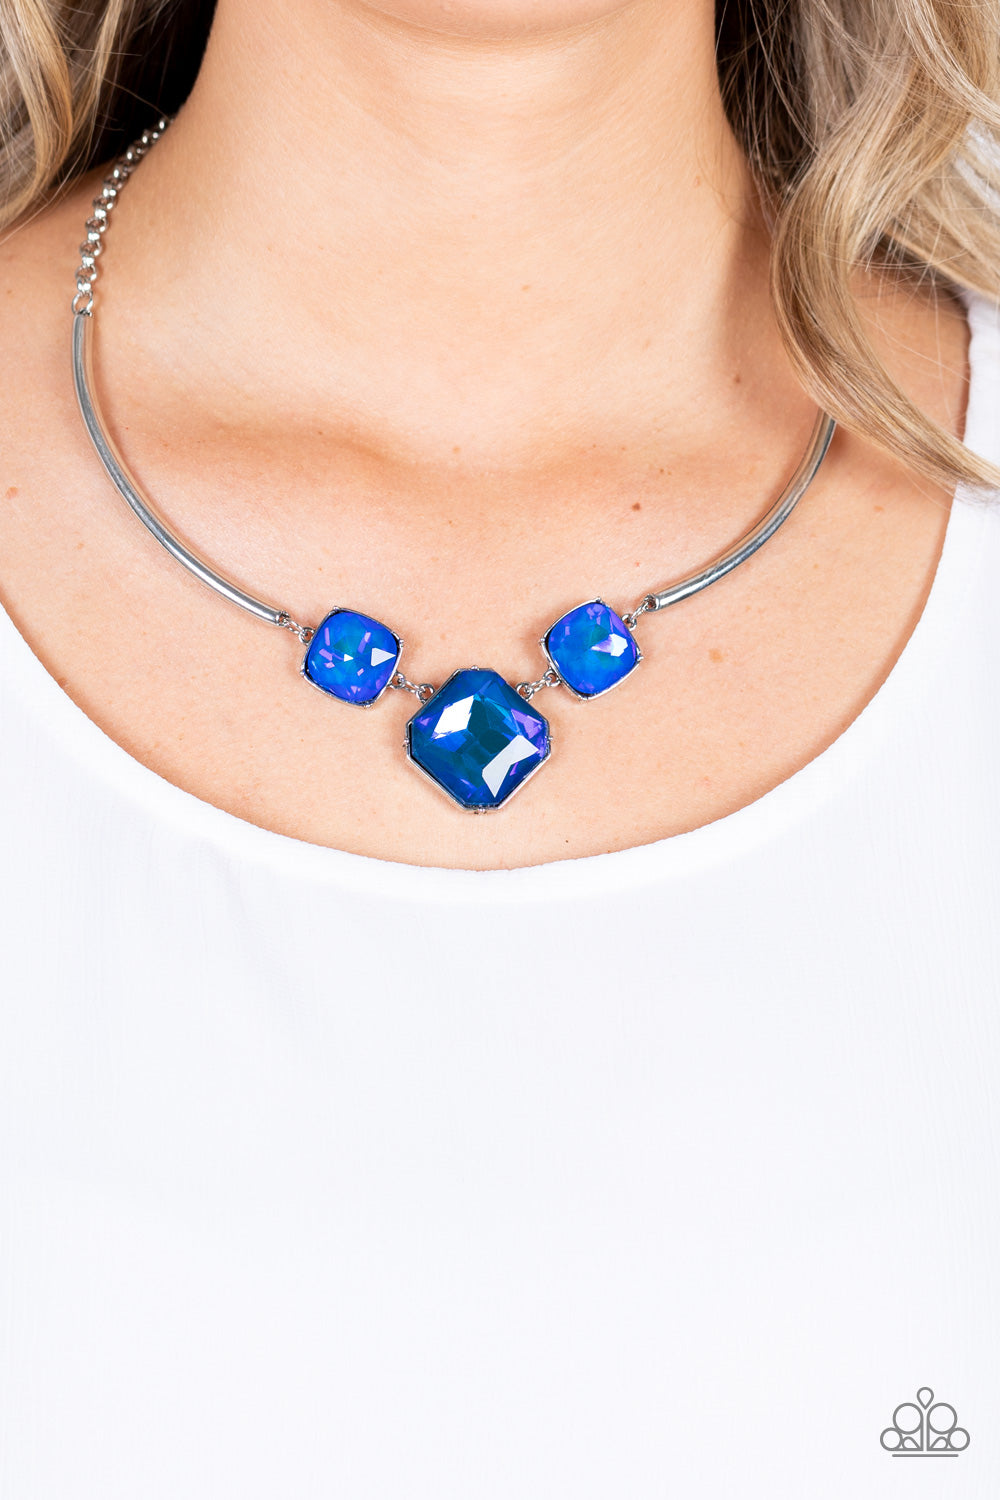 Divine IRIDESCENCE - Blue Necklace - Life of the Party October 2021